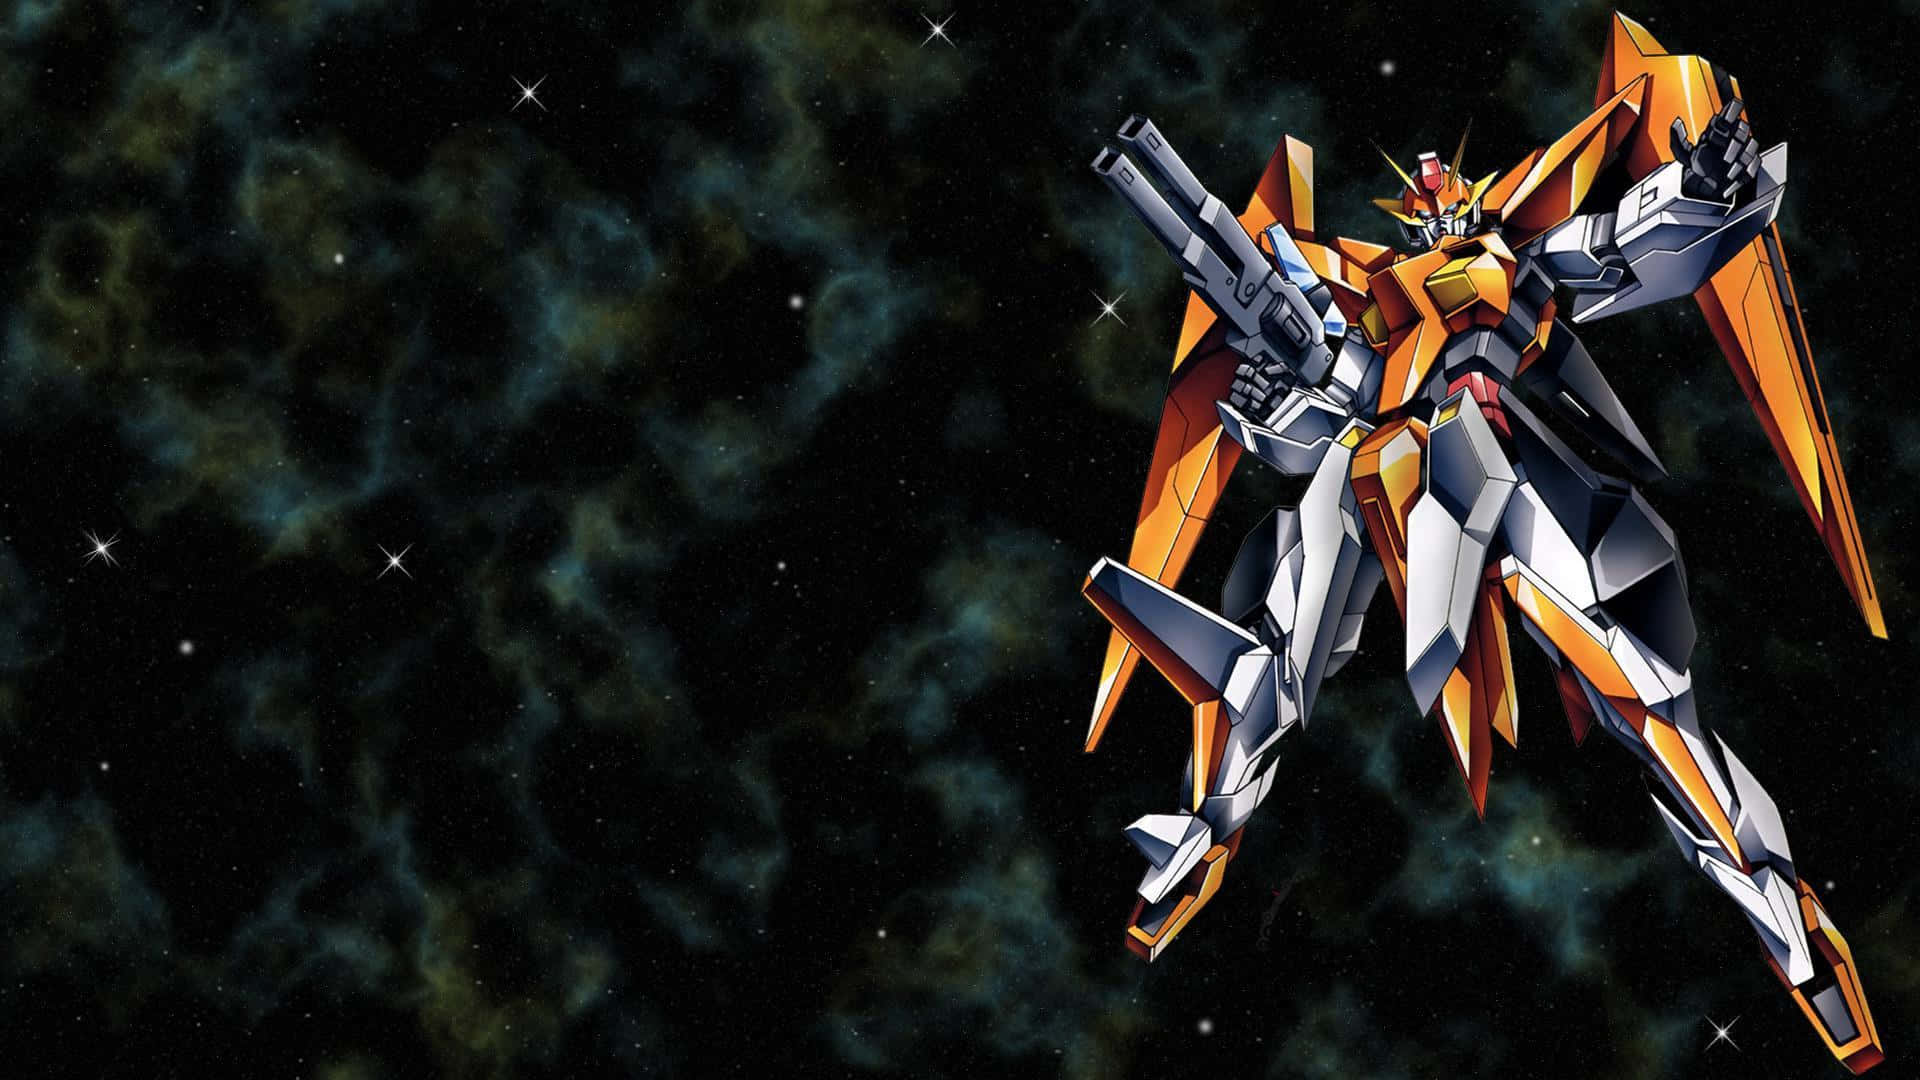 "The Unstoppable Power of the Gundam"